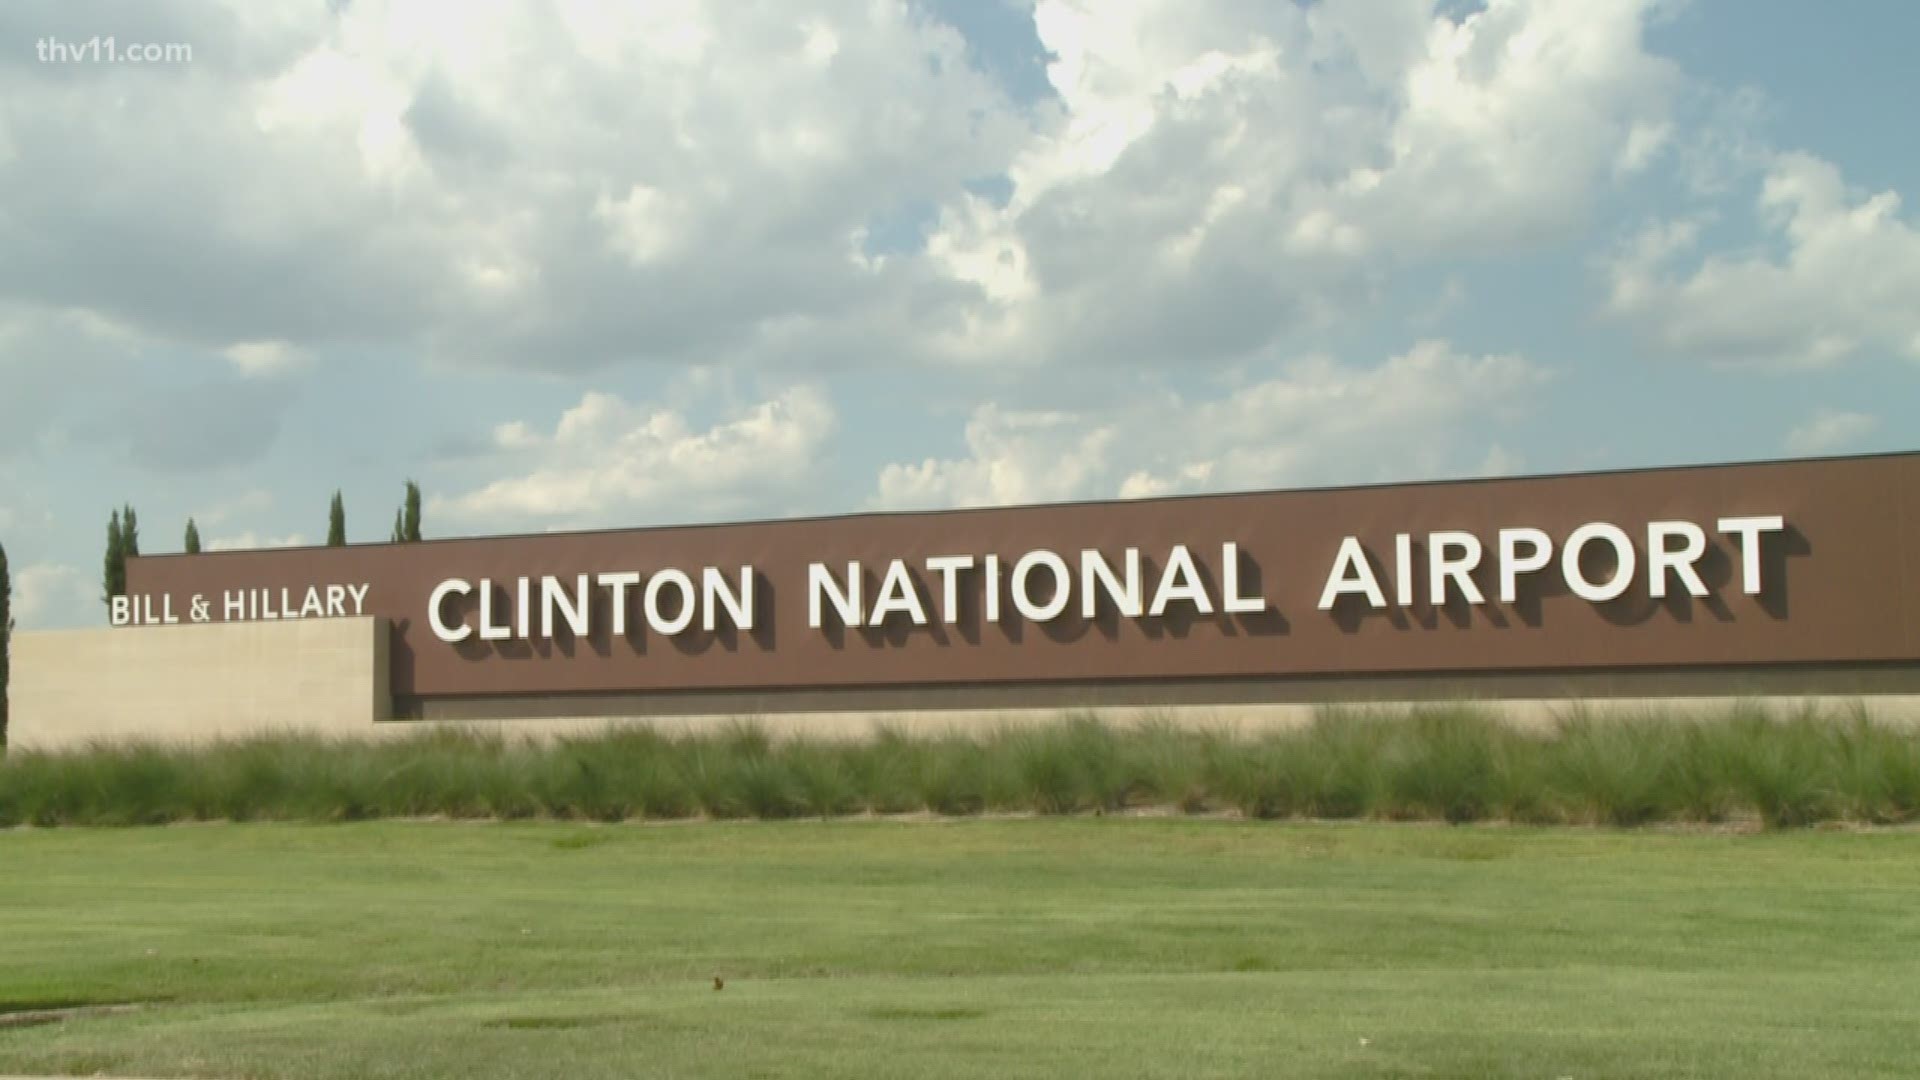 The final phase in a years-long improvement project will soon begin at Clinton National Airport.